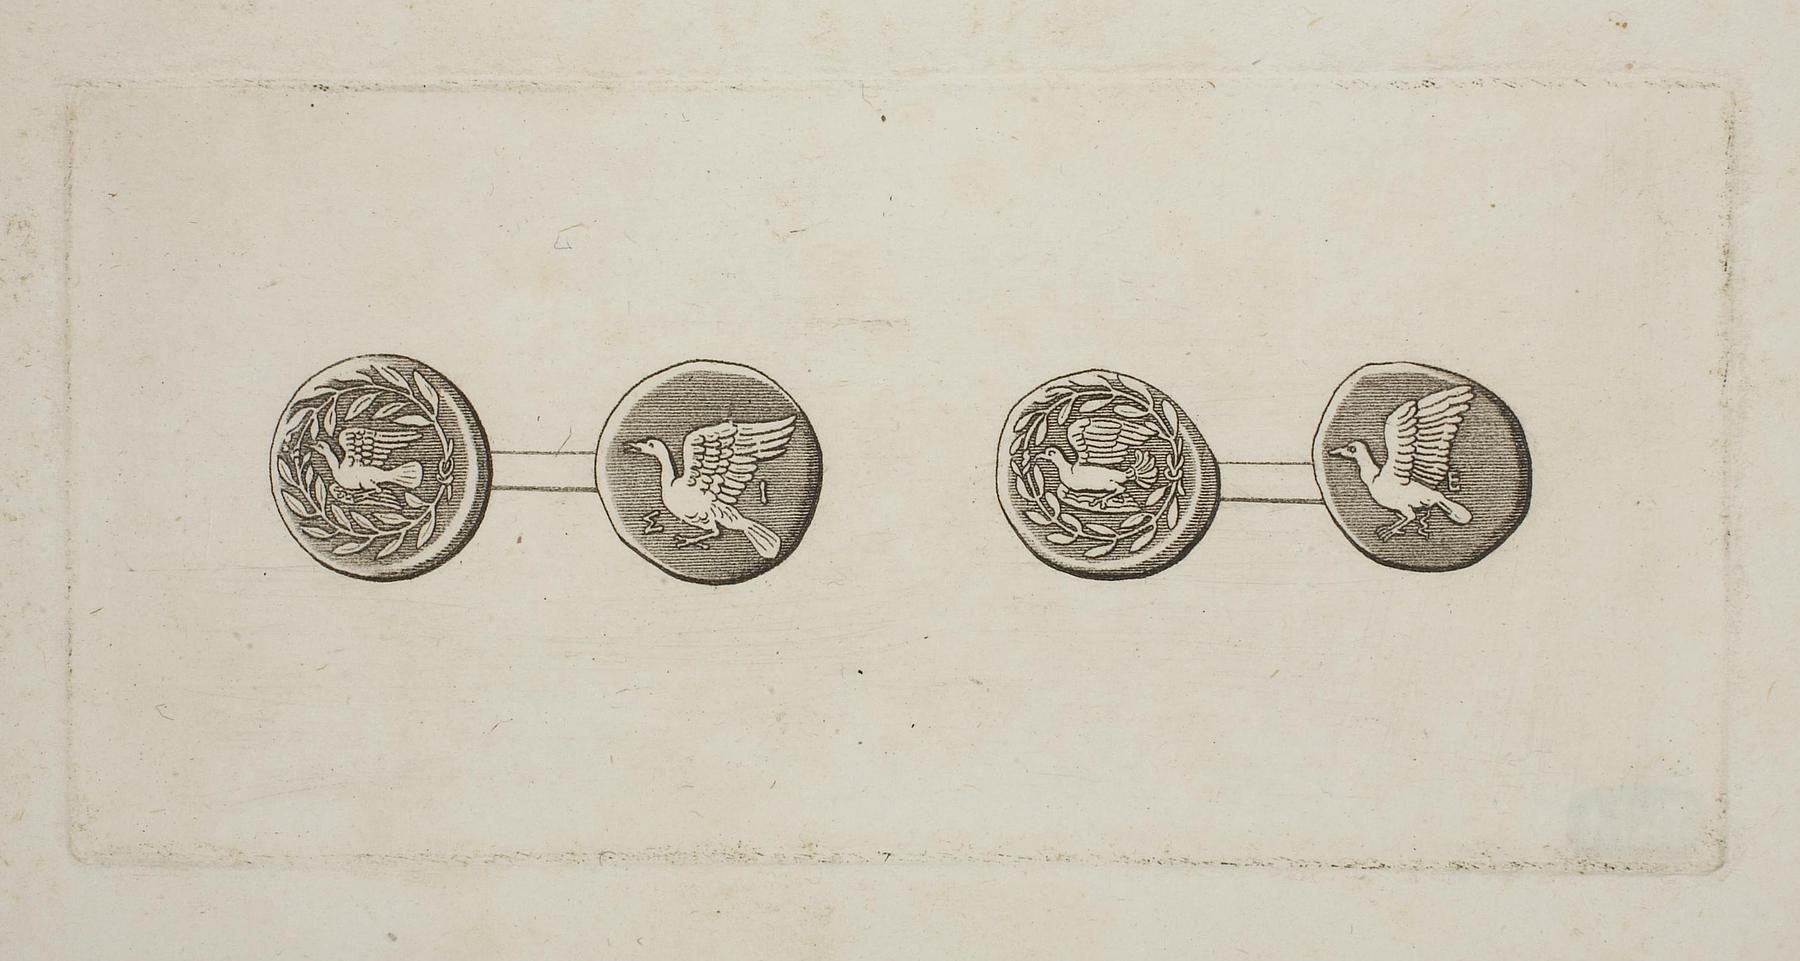 Greek coins obverse and reverse, E1564